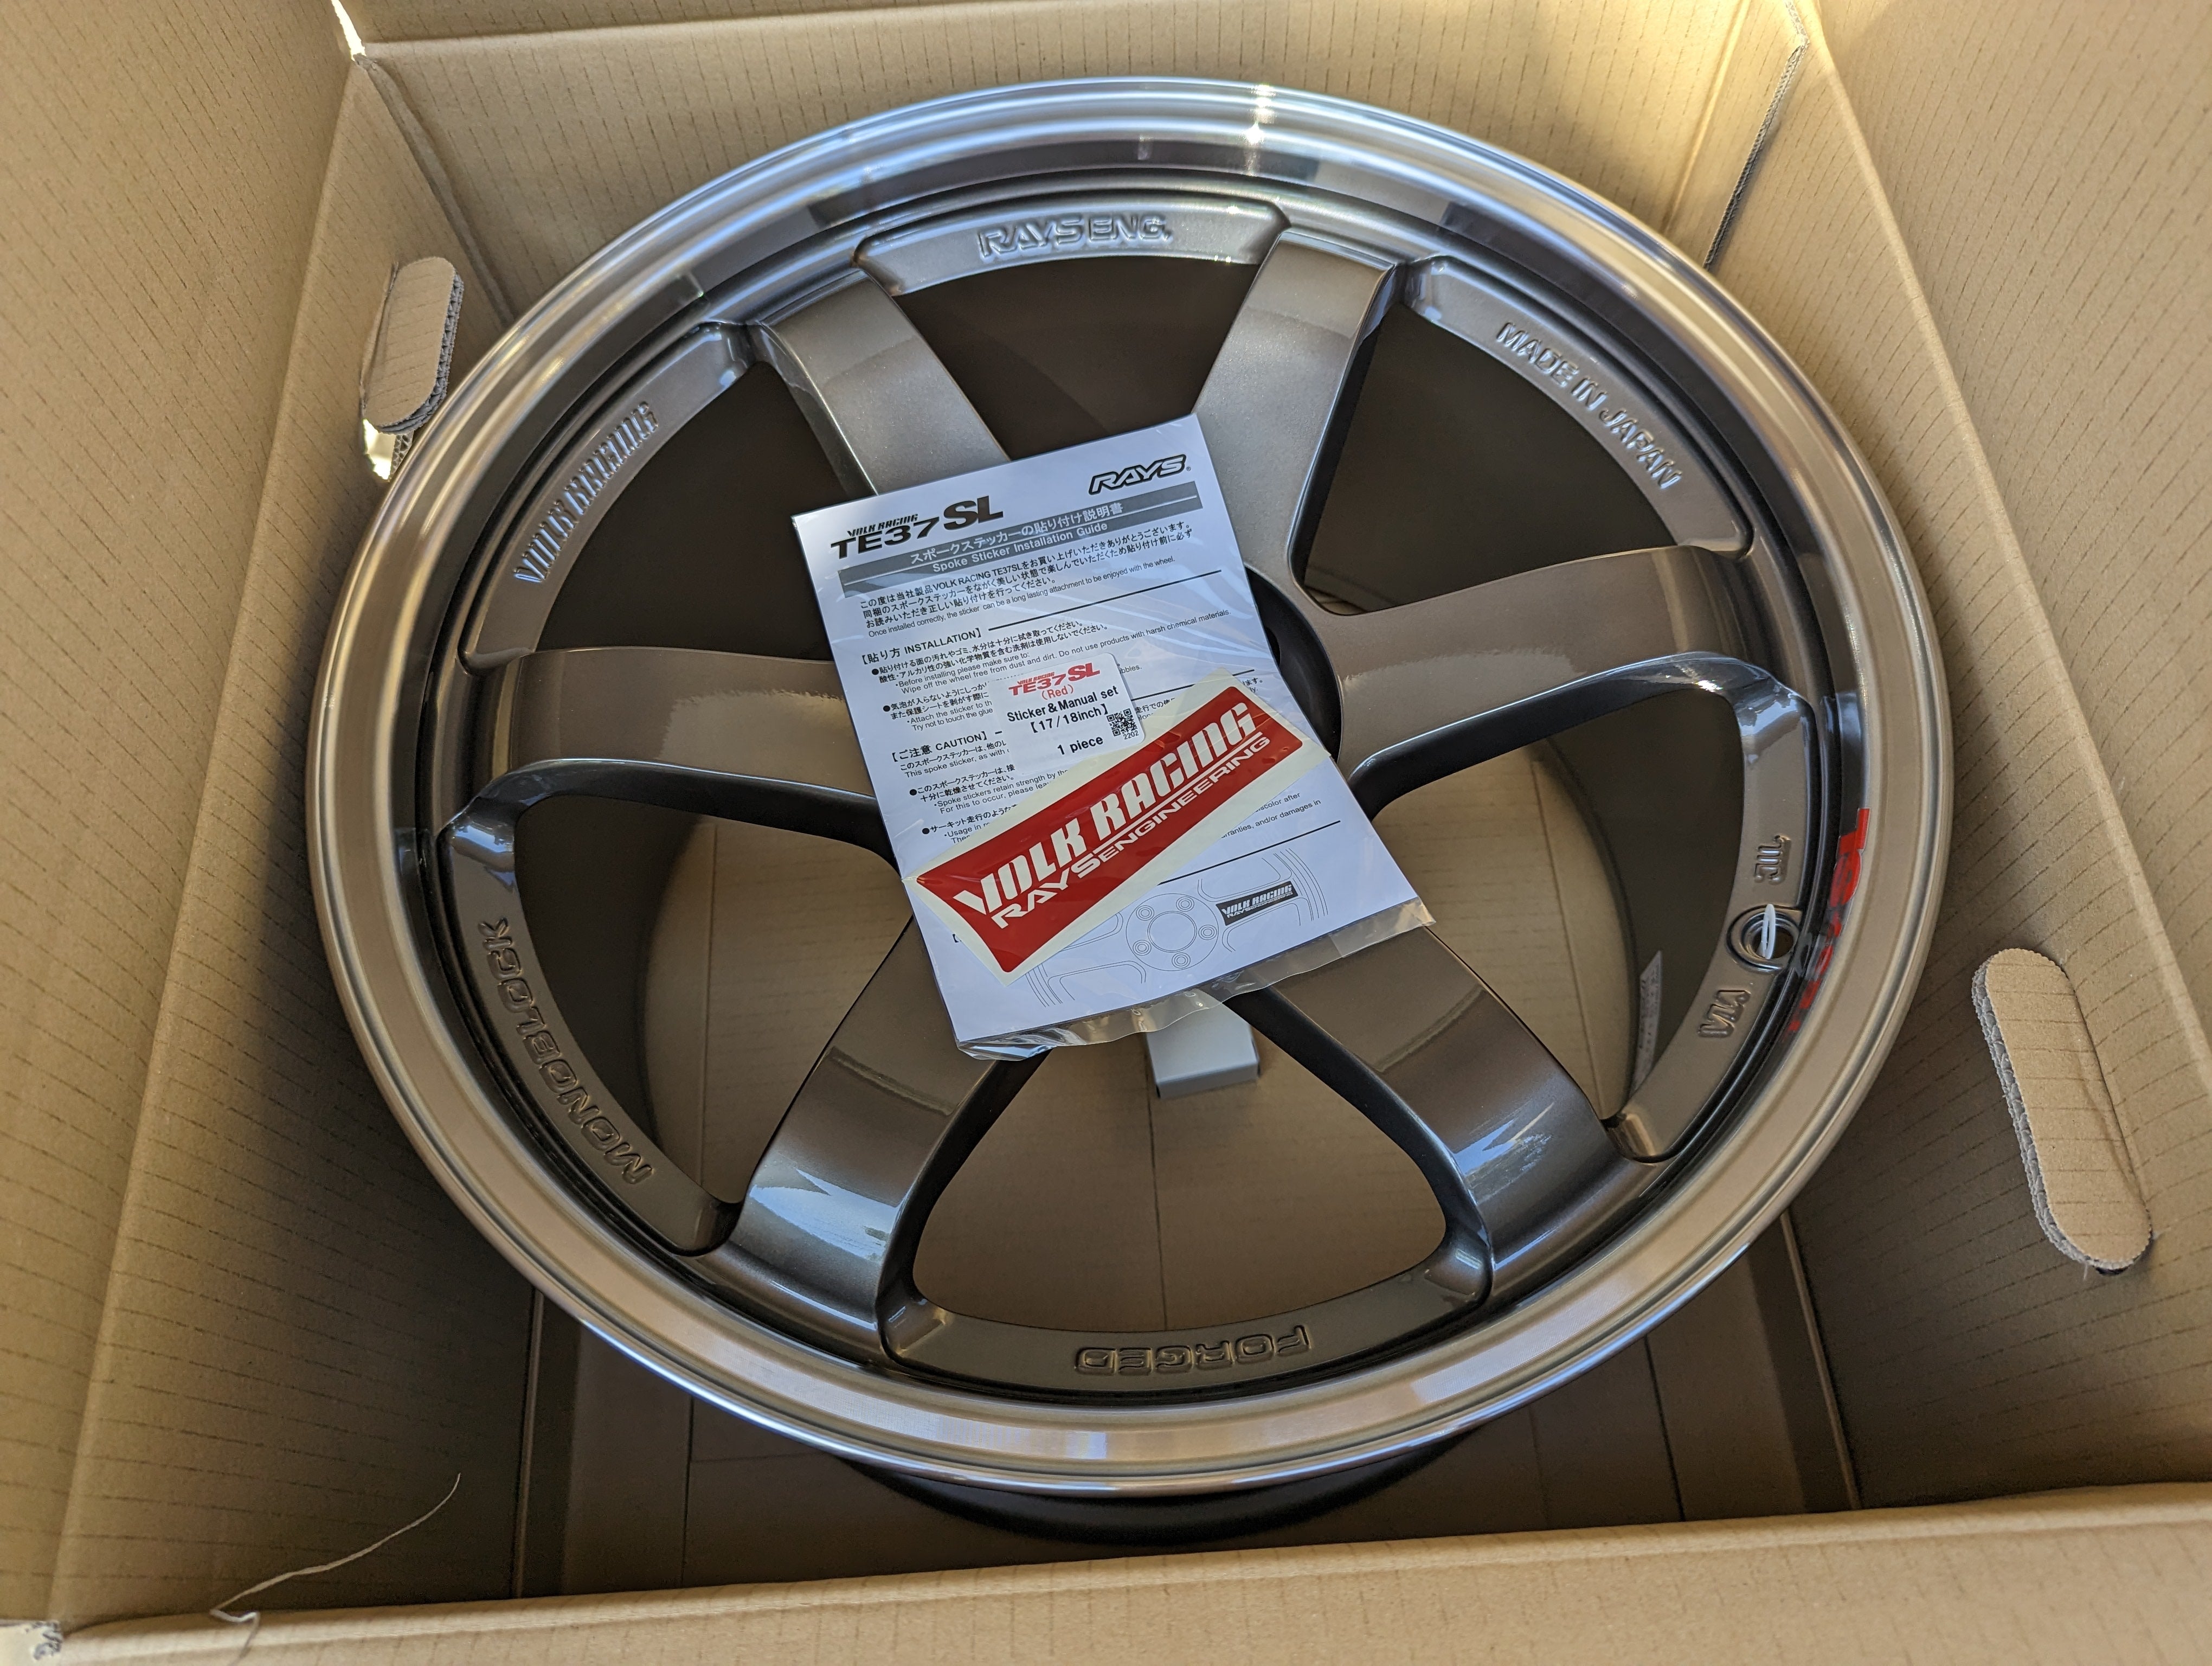 *PAIR* *Discontinued* Brand New in Box Double (Pressed Graphite) Rays Engineering Volks Racing TE37SL with Genuine Volk Racing Stickers - 18x10.5 +15